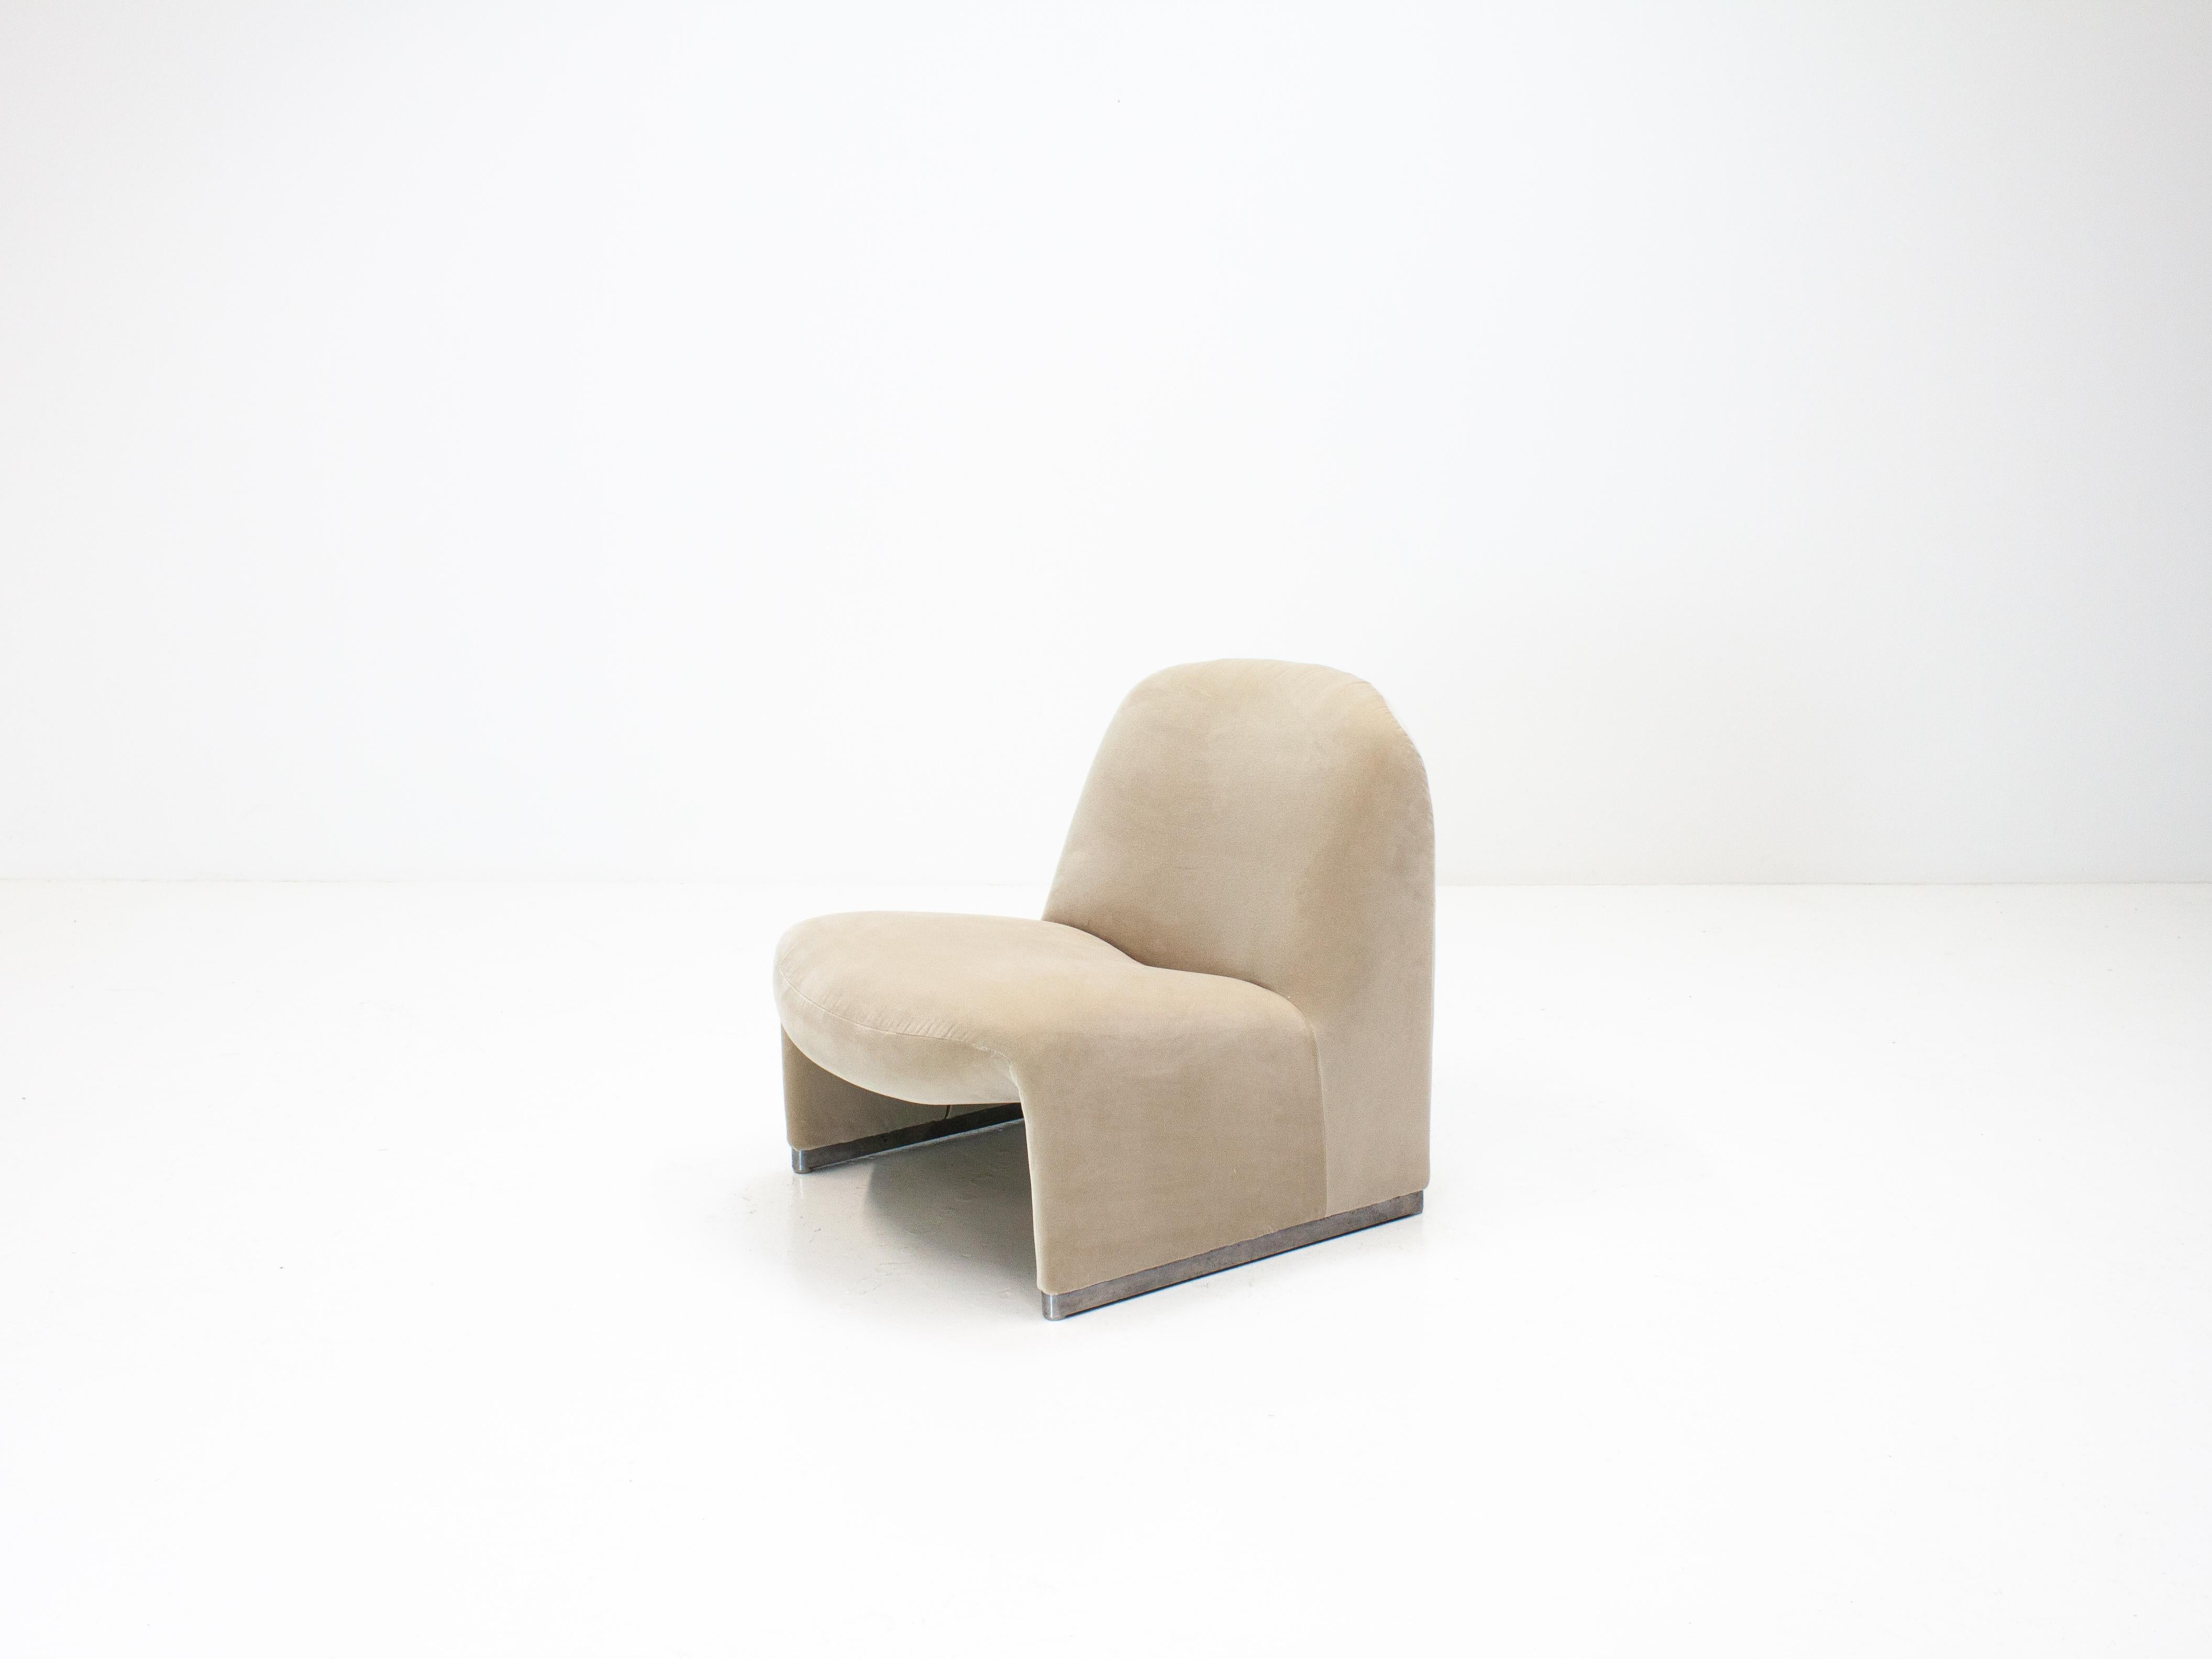 A Giancarlo Piretti “Alky” chair newly upholstered in designers guild linen colored velvet. Manufactured by Artifort in the 1970s.

The organic shape offers a minimal appearance but also comfort.

 












   